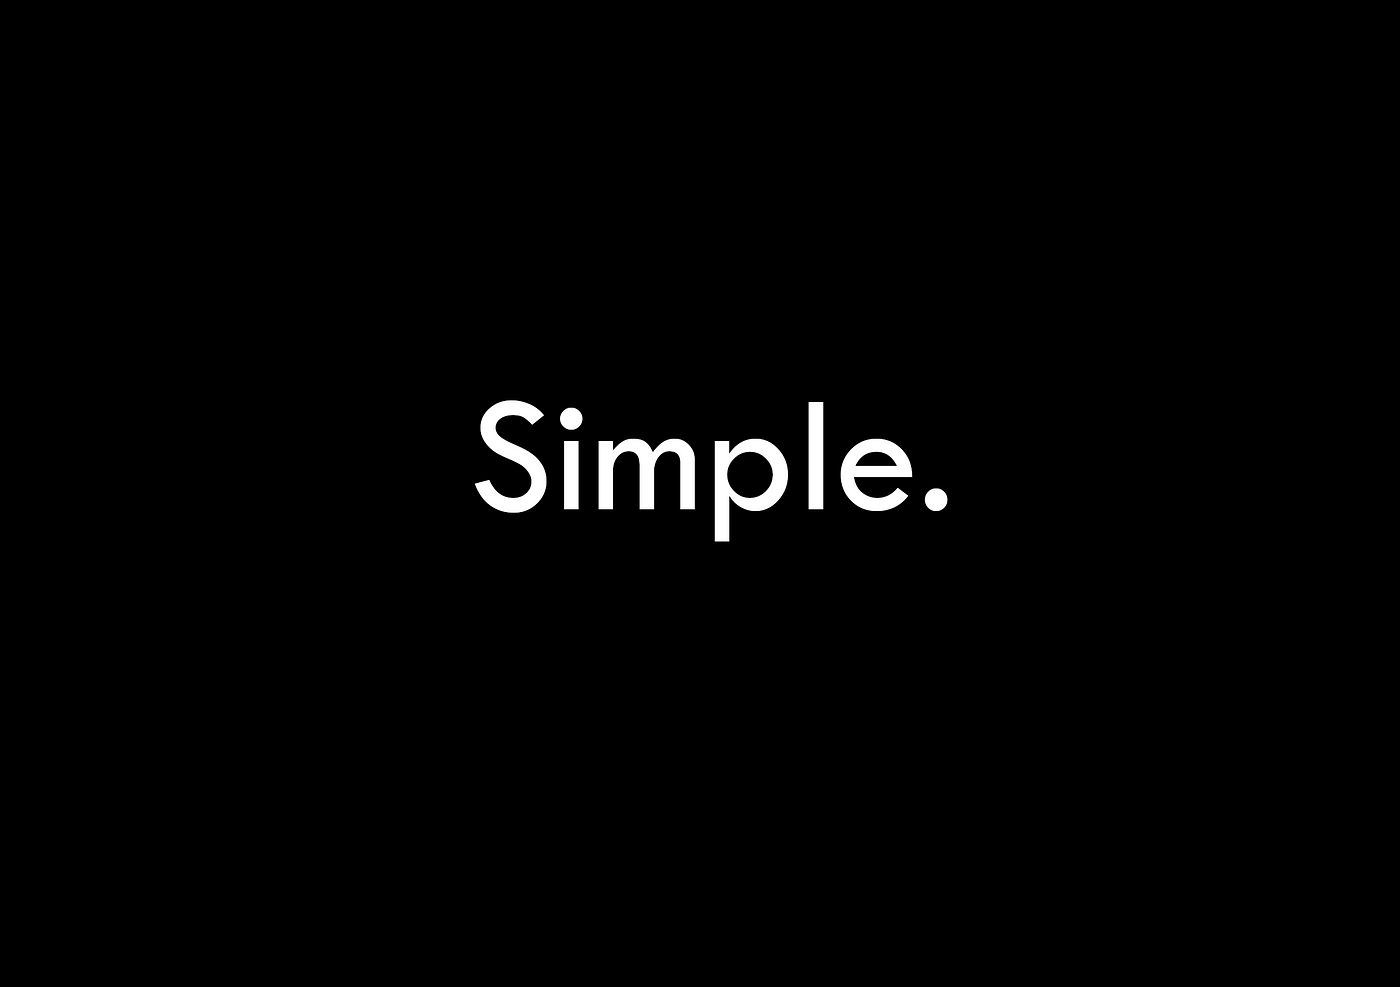 how-to-simplify-life-to-make-your-life-better-by-lee-wei-lun-darren